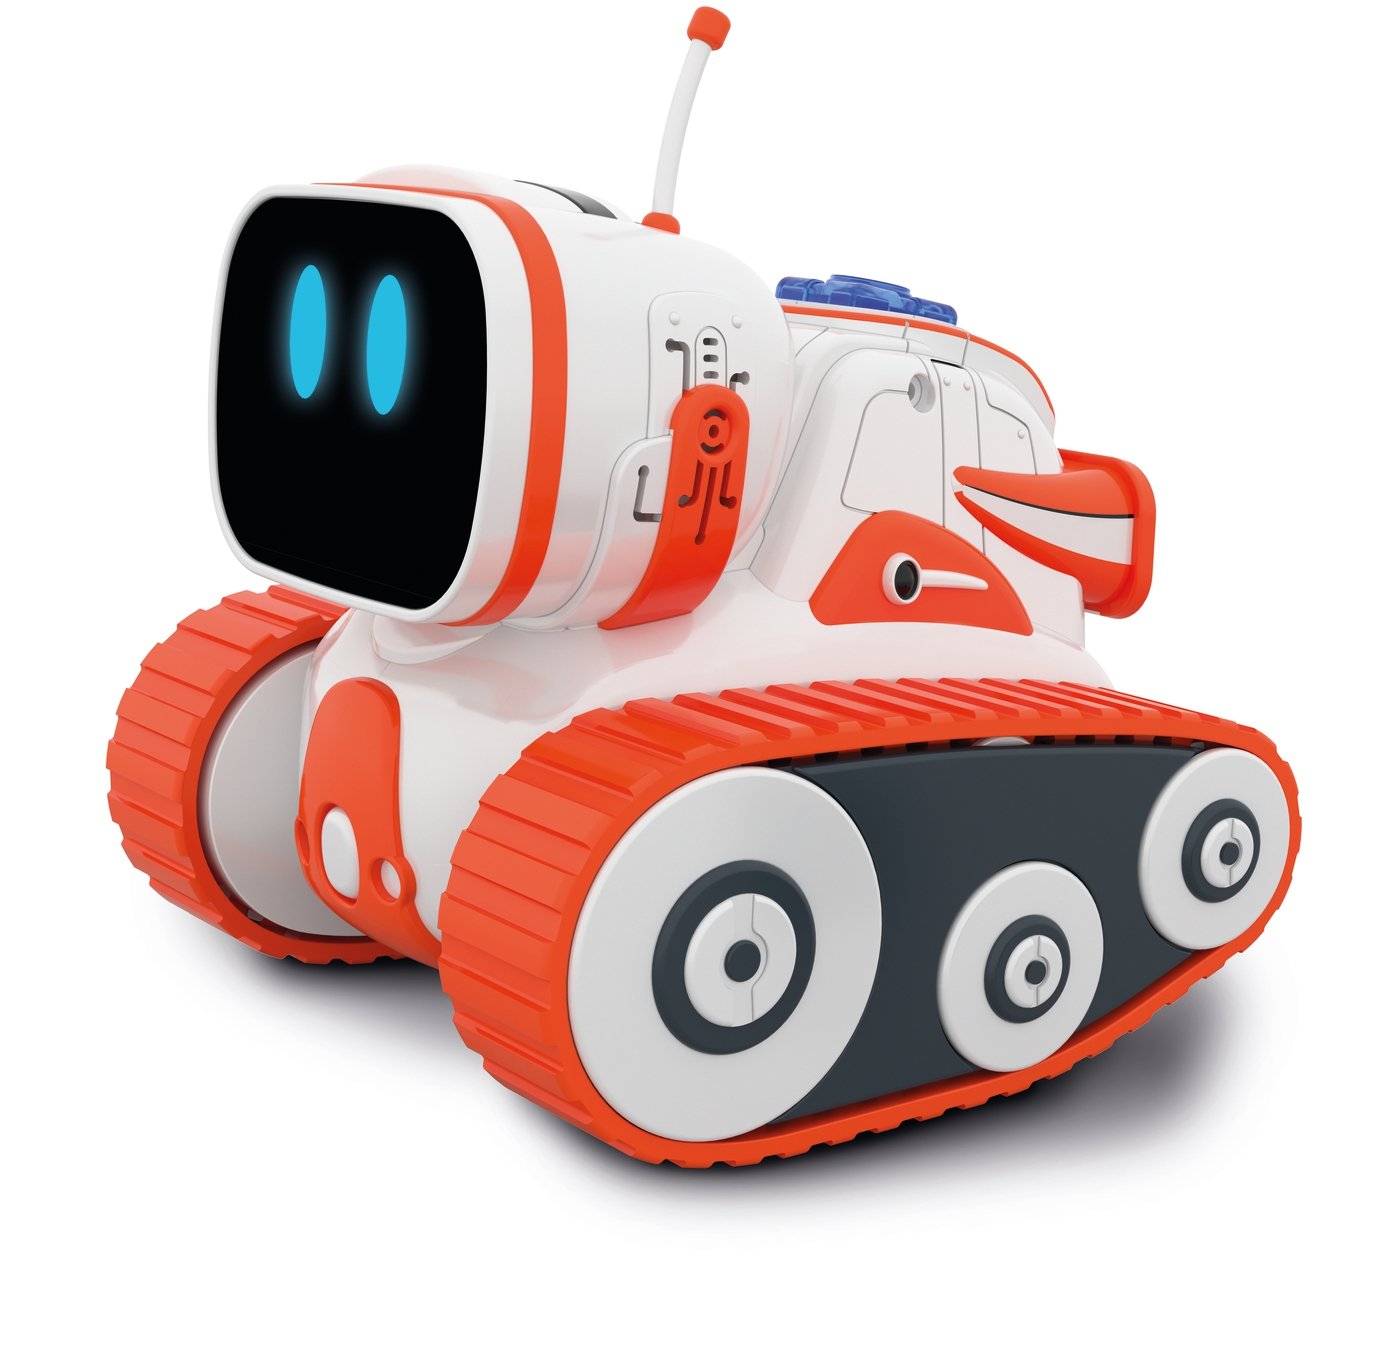 Details about   Tobbie The Robot Educational Robot Toy Smart Obstacle 